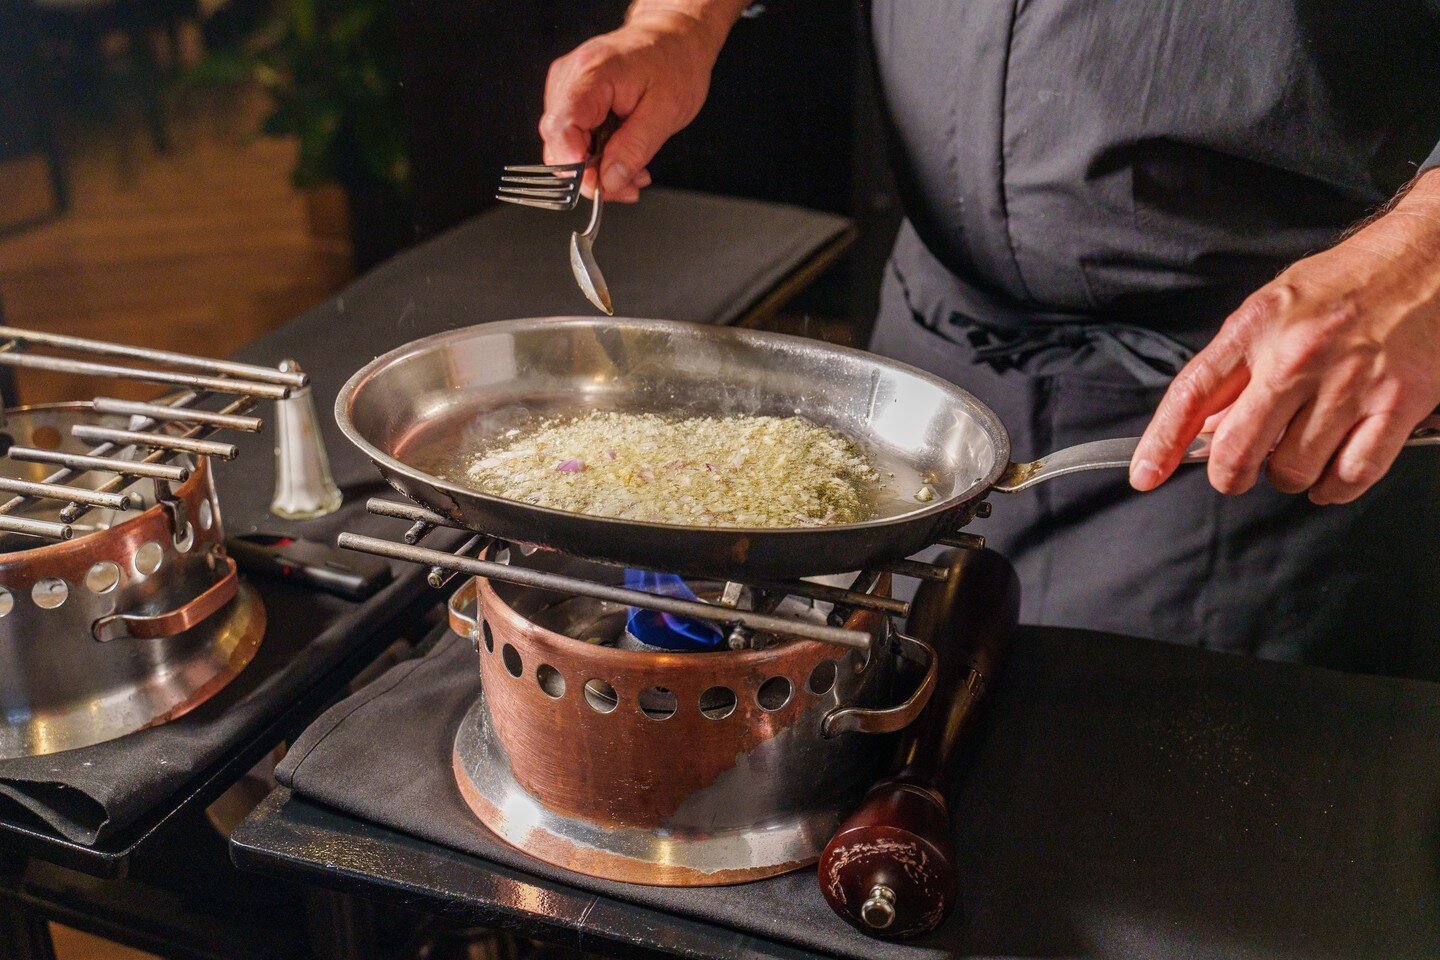 Every delicious meal starts with an incredible presentation! Enjoy dinner and a show with Mezza Luna&rsquo;s tableside cooking services that are bound to make for an unforgettable dining experience.
&bull;
&bull;
&bull;
&bull;
#mezzaluna #italiancuis